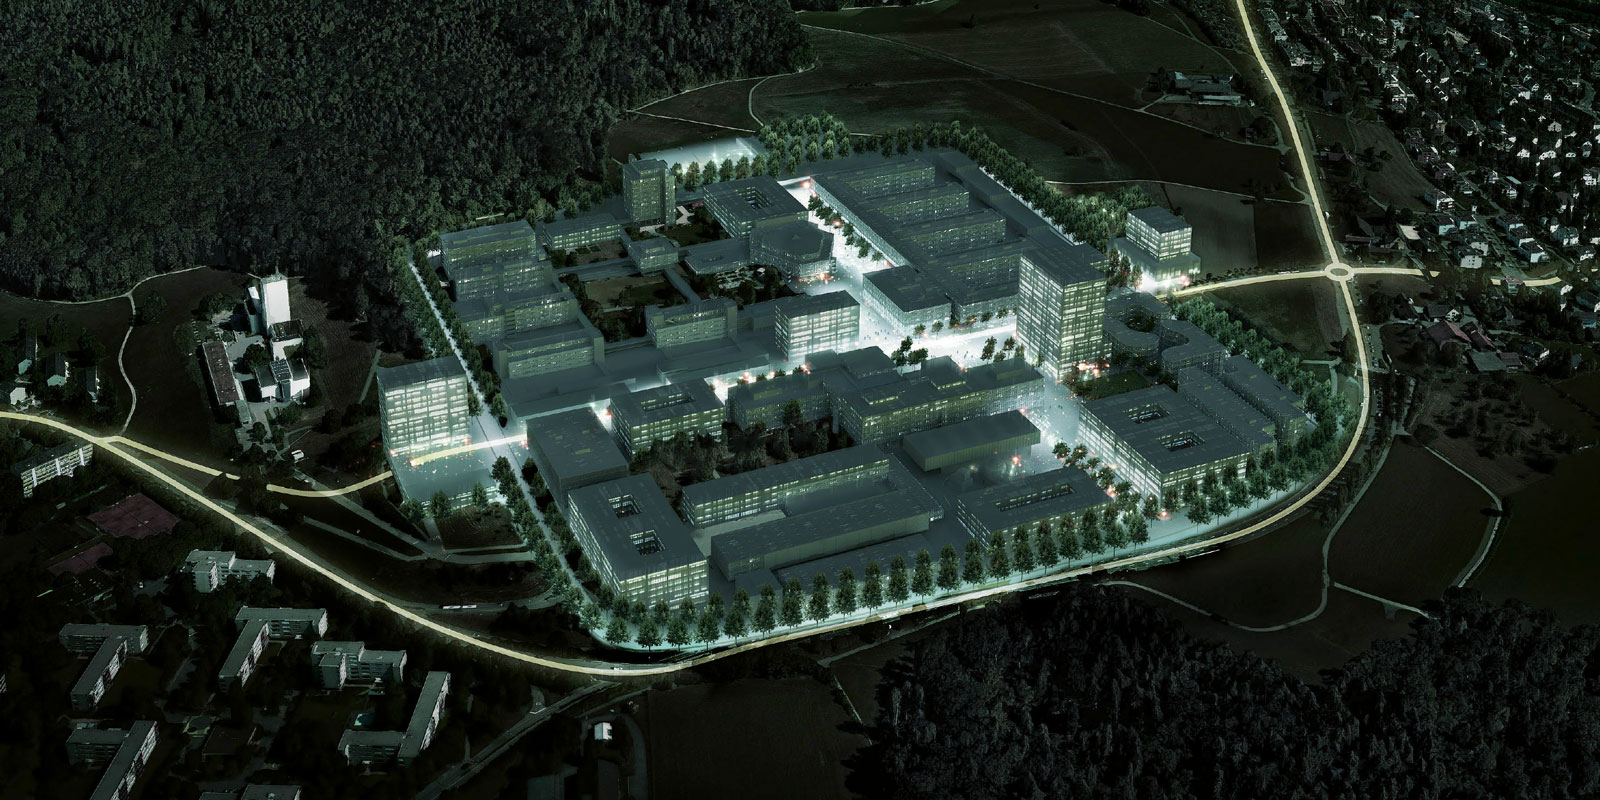 The Hönggerberg campus is central to ETH Zurich's future plans: The vision is to make it an attractive campus with the feel of a city district. (Visualisation: EM2N)